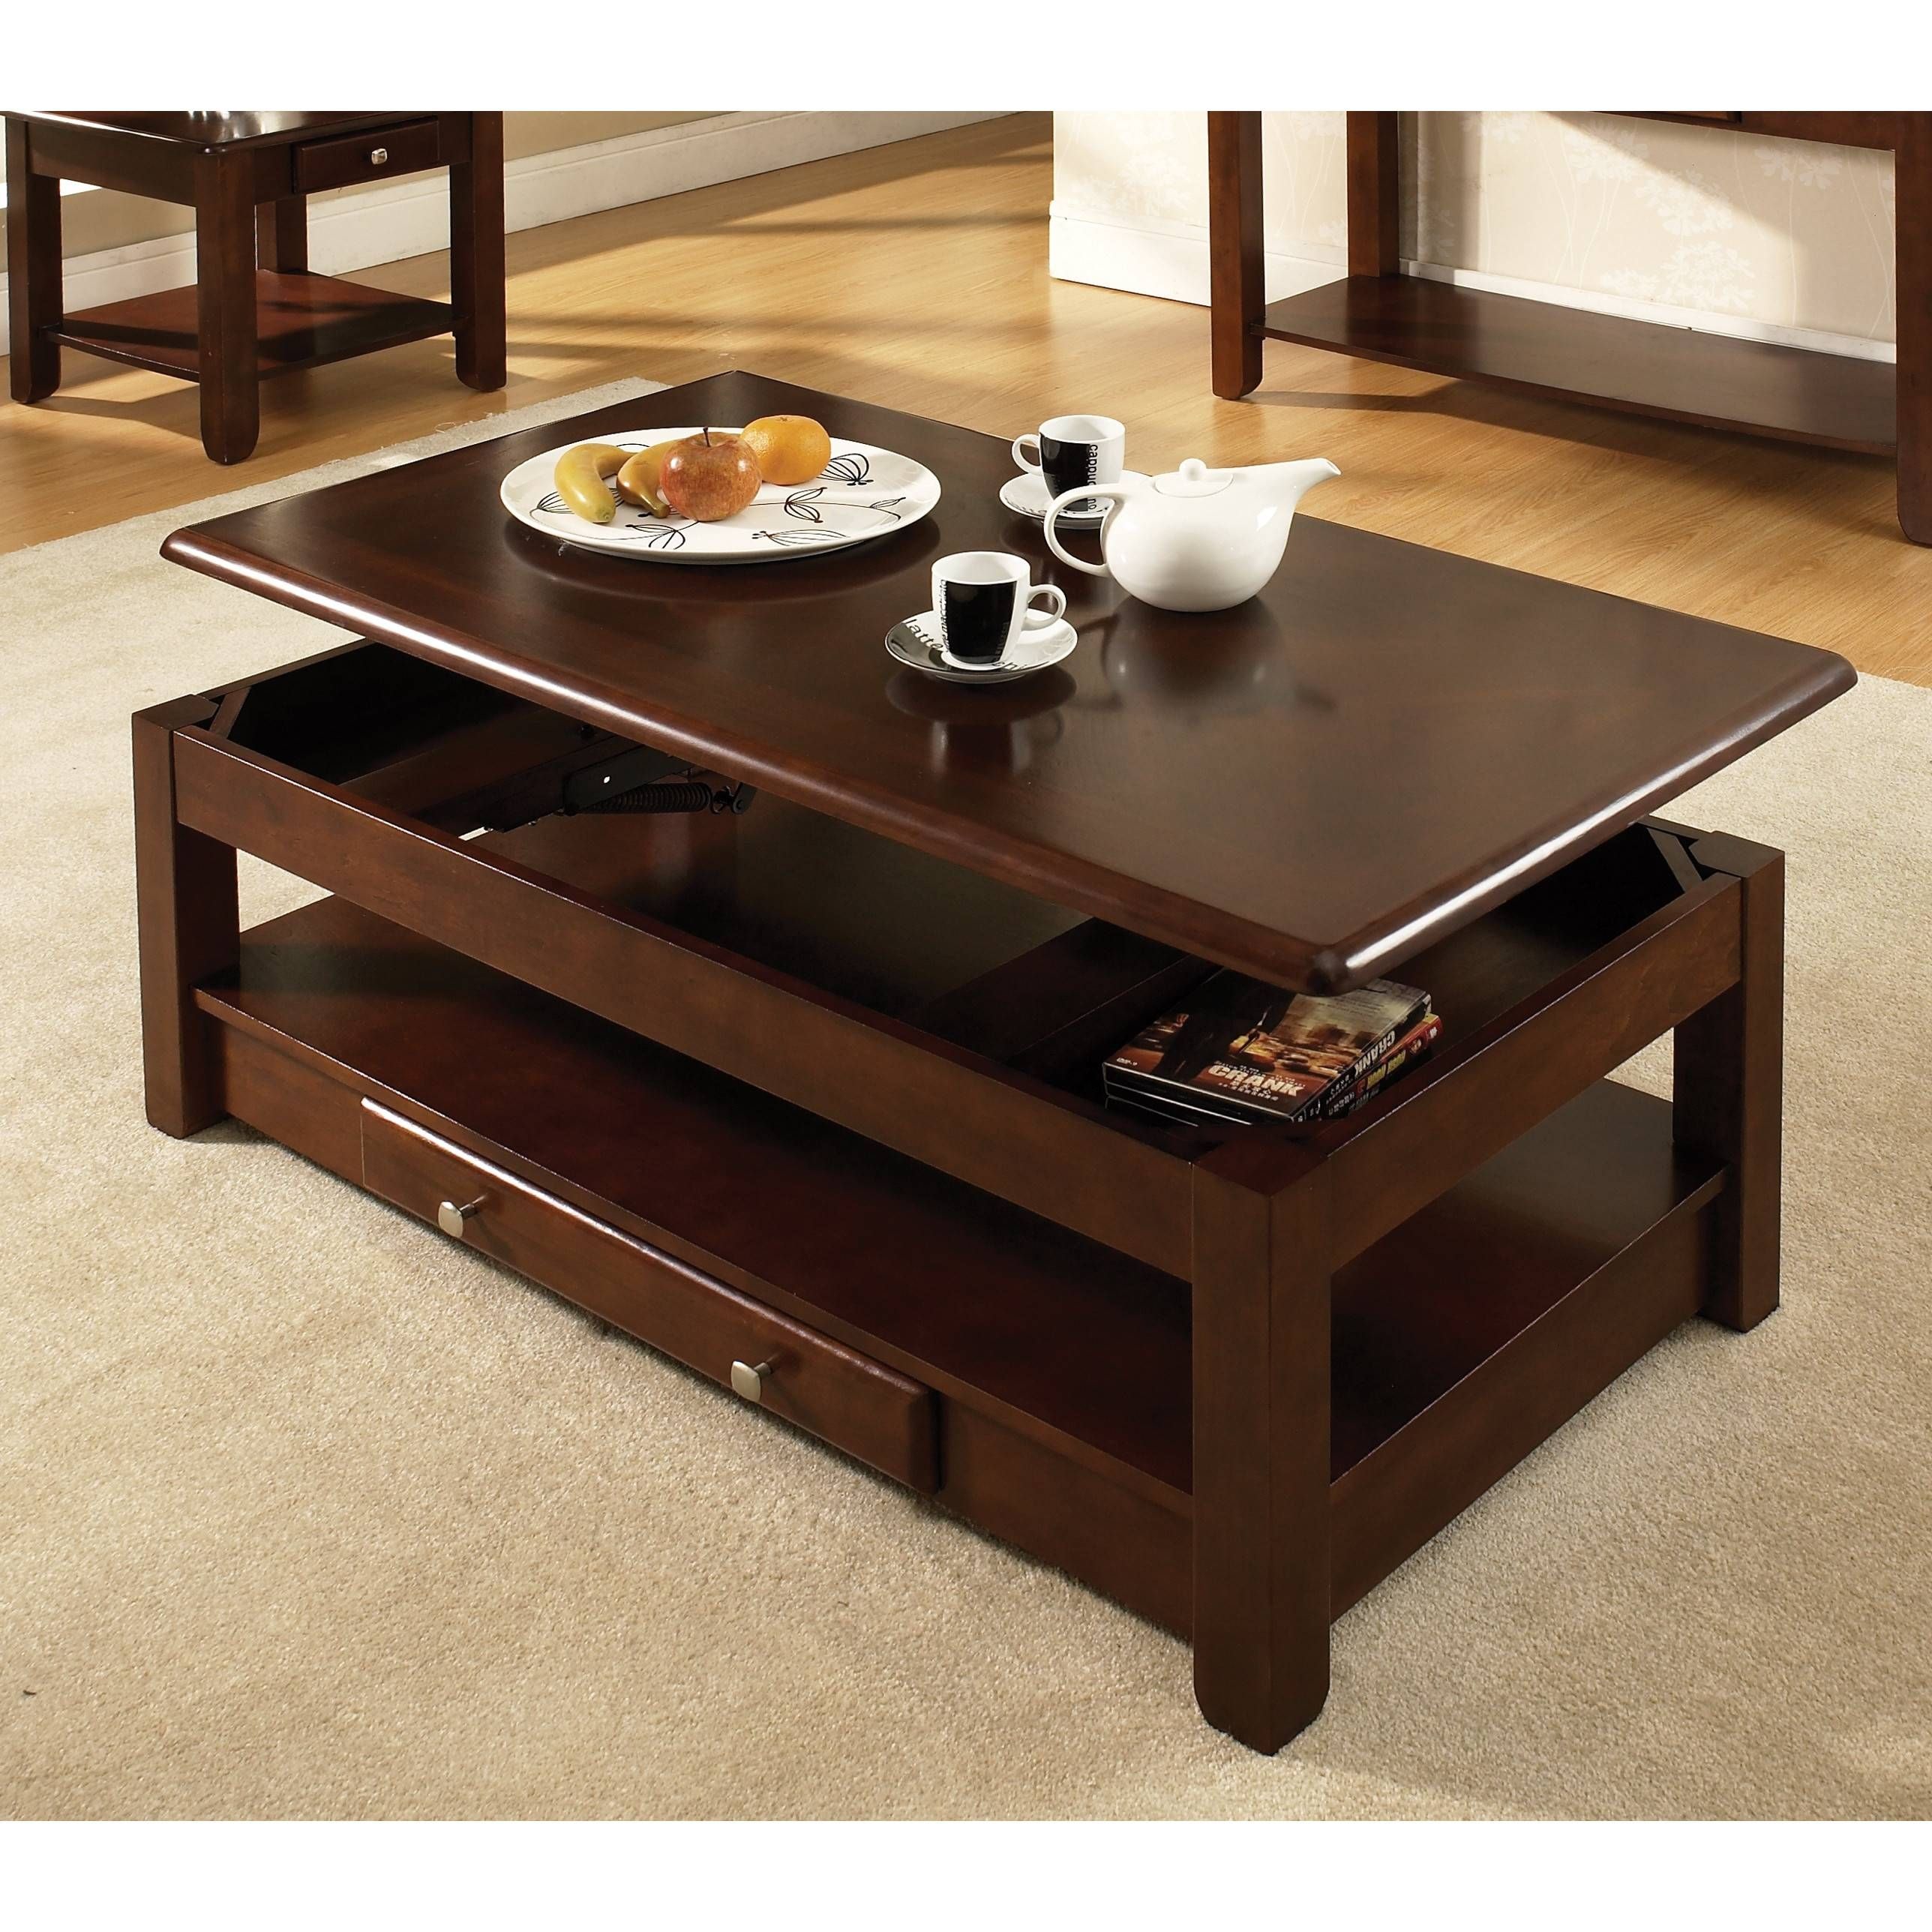 Lift Top Coffee Table Reviews In Waverly Lift Top Coffee Tables (View 16 of 30)